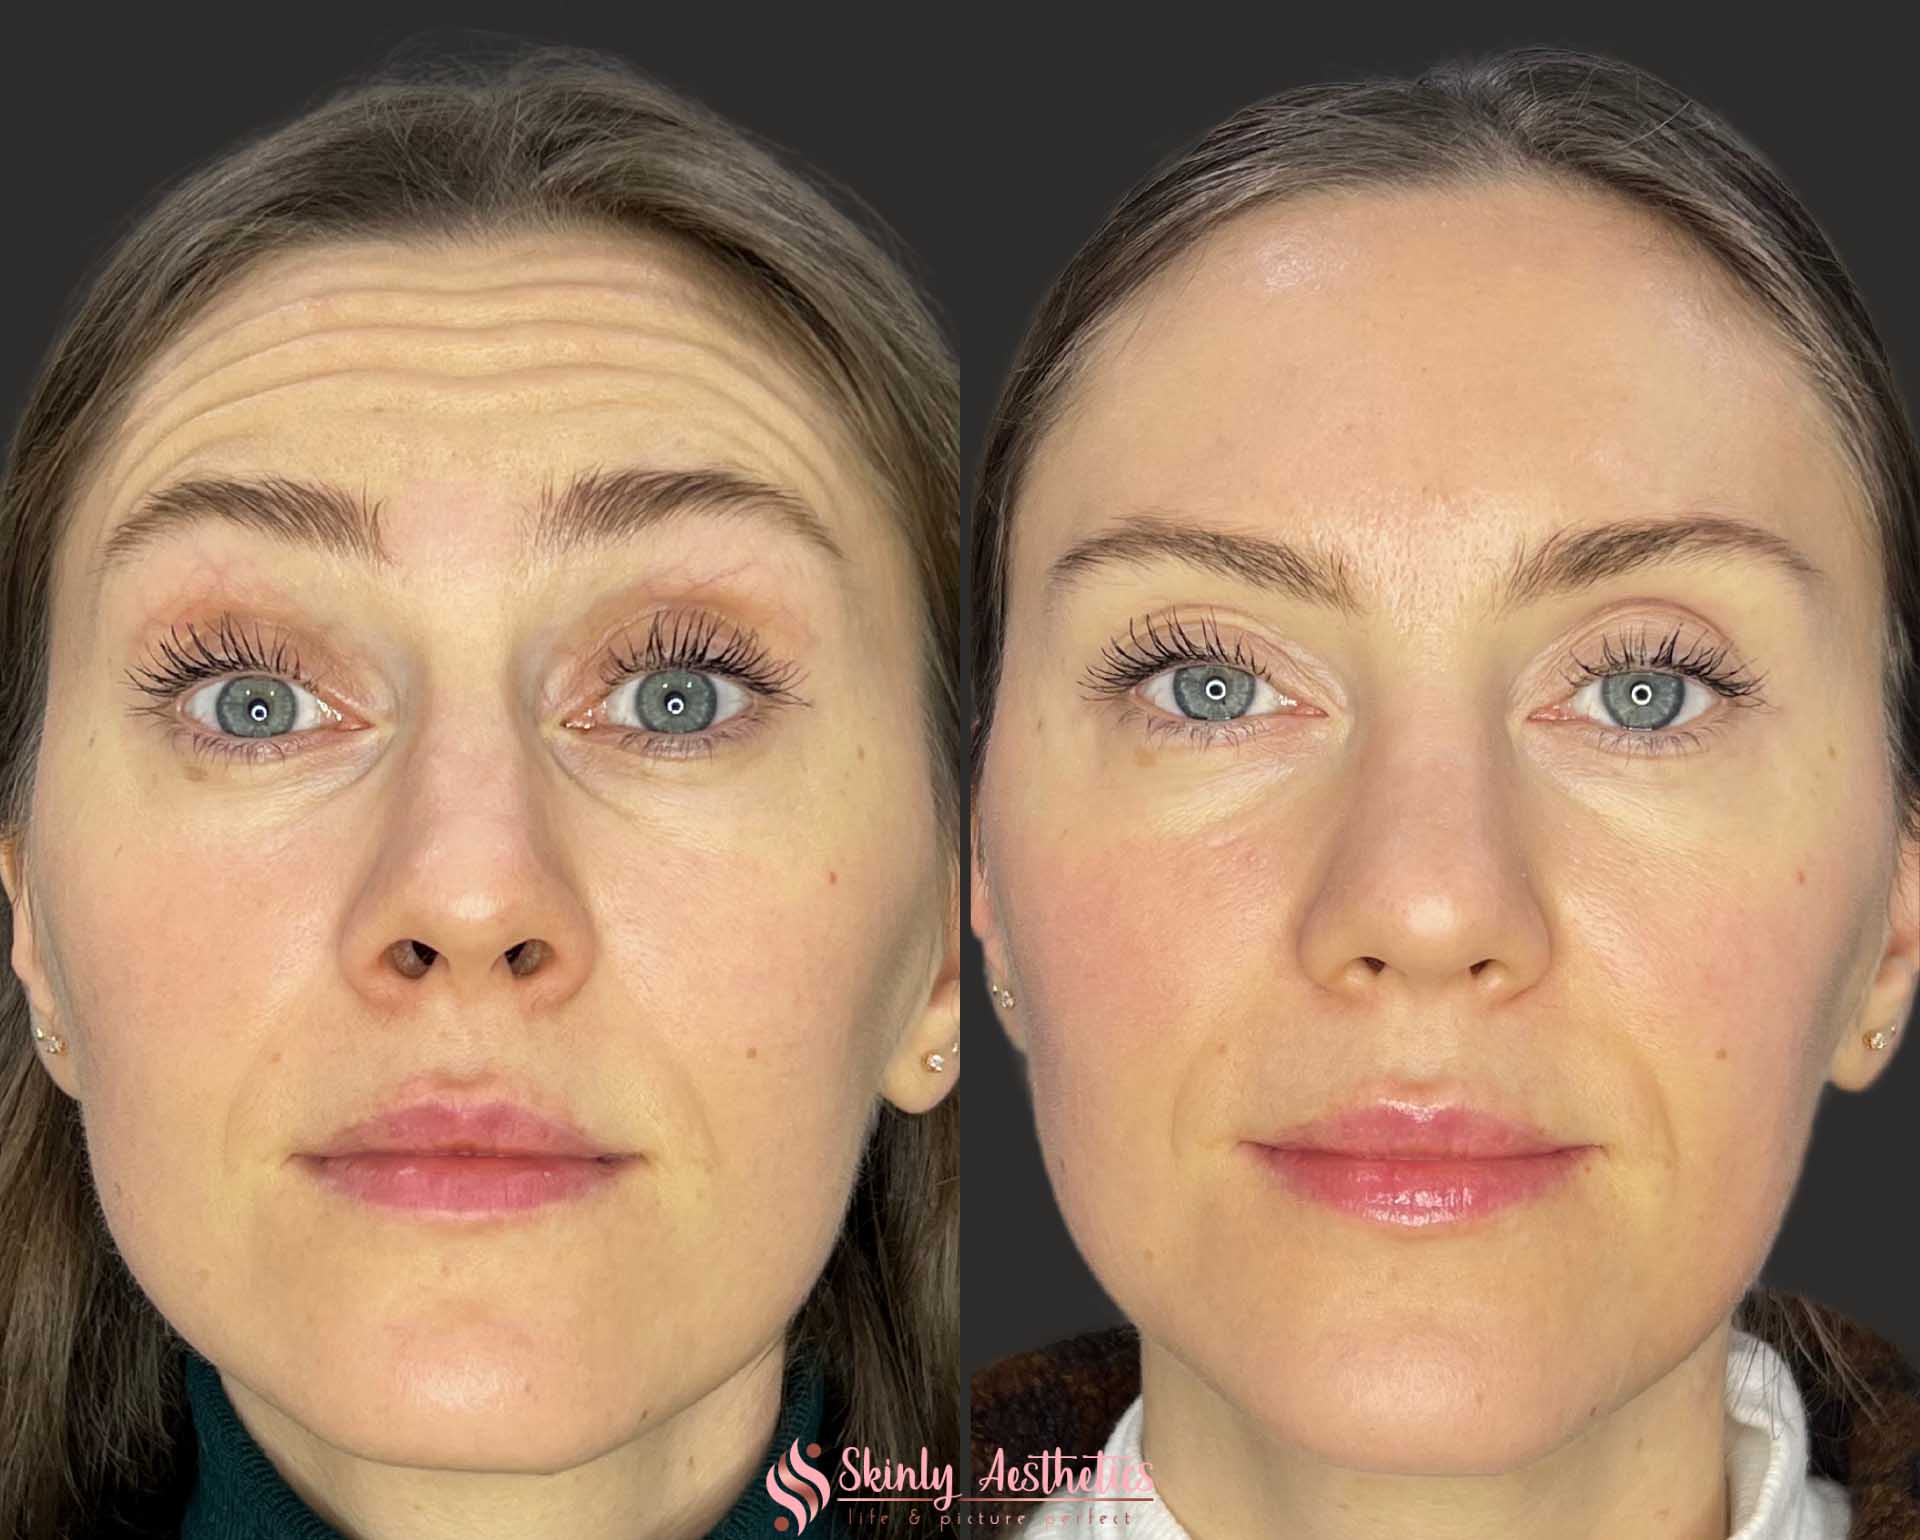 before and after results demonstrating effects of 20 units of Botox for horizontal forehead wrinkles